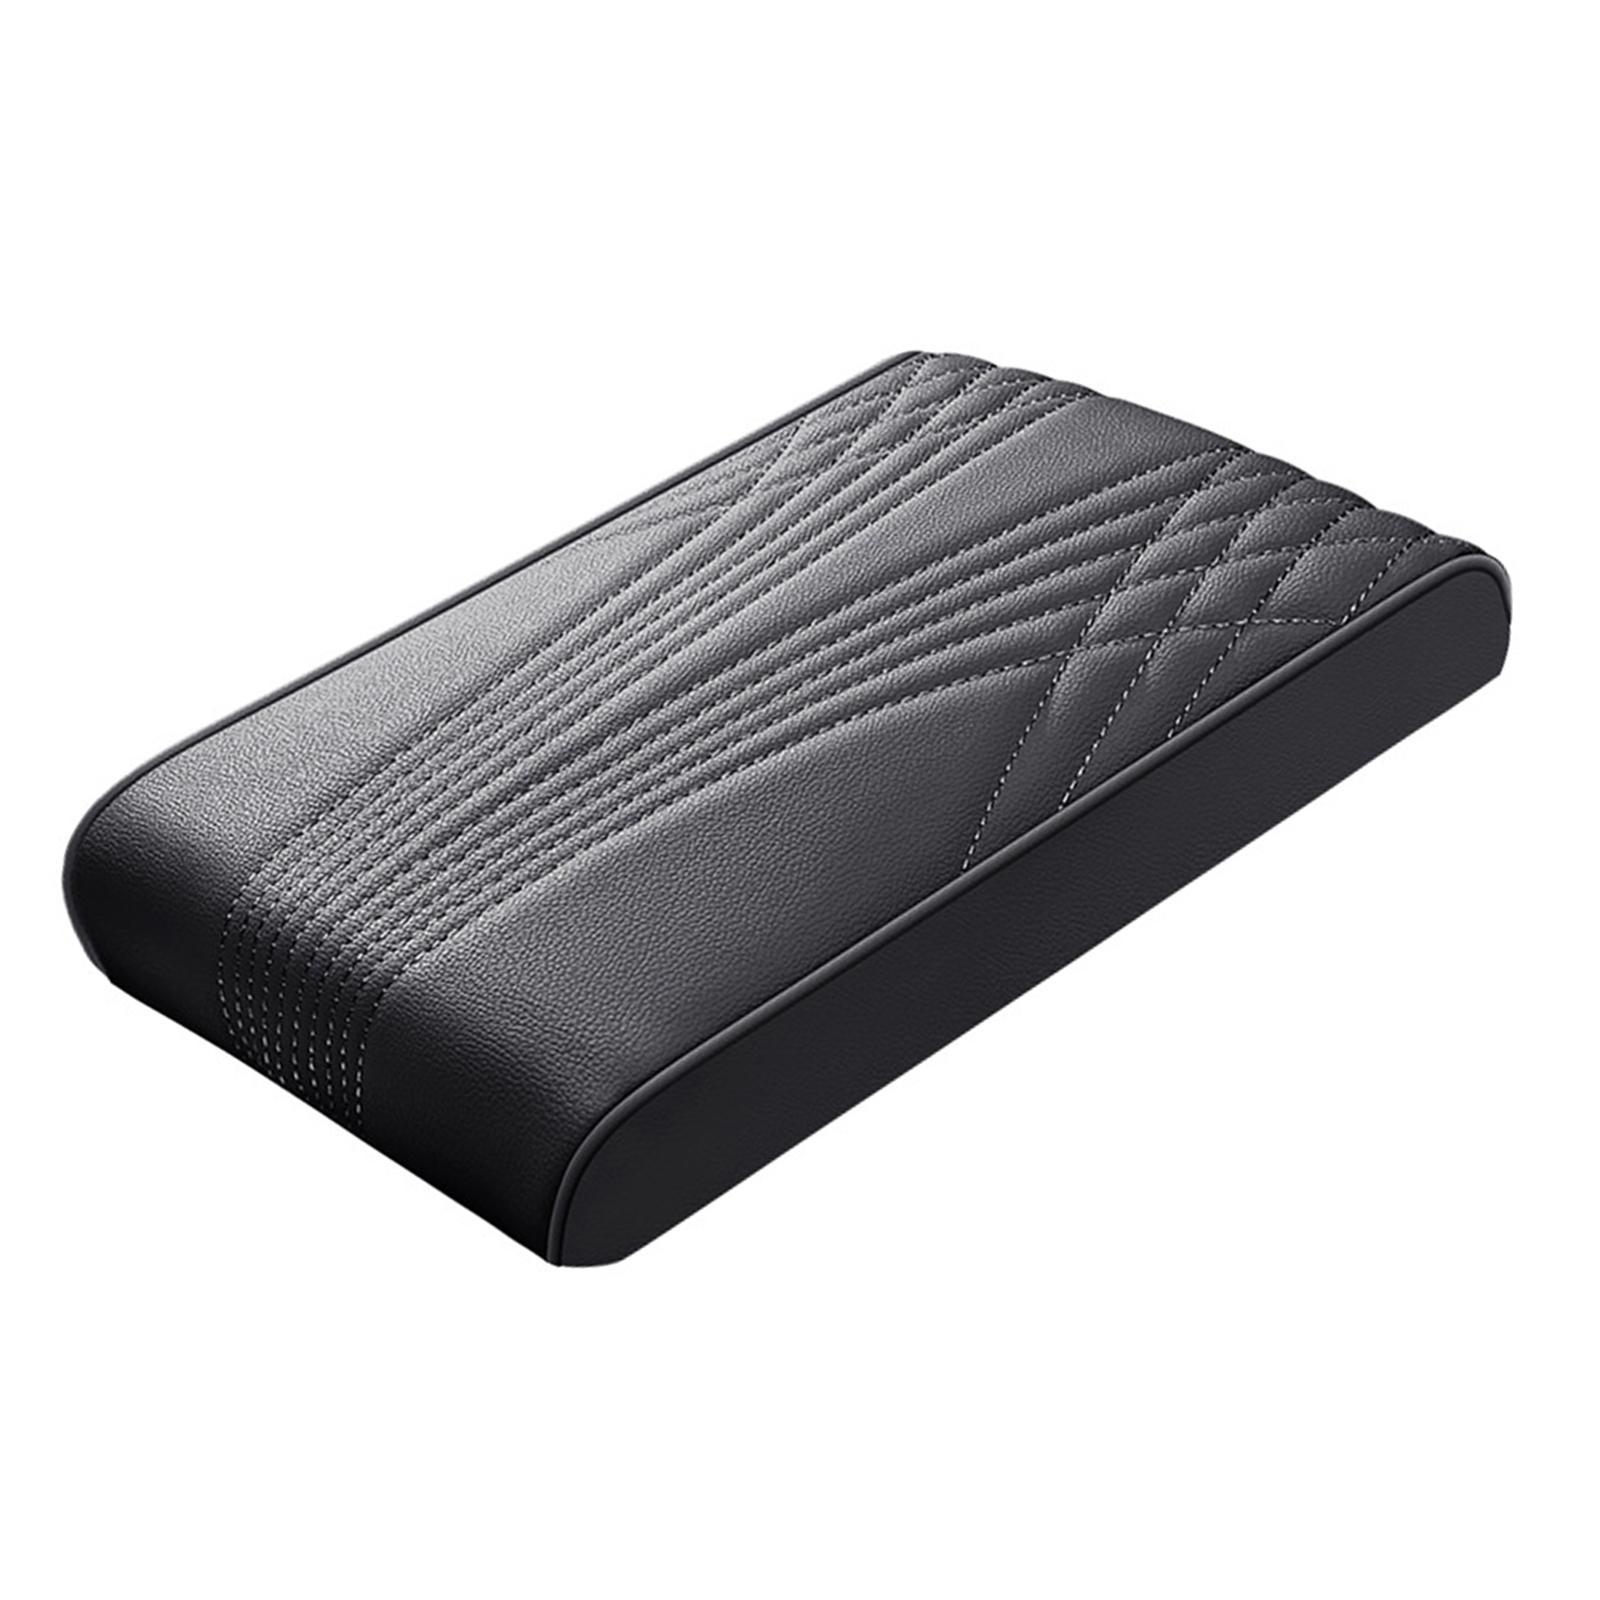 Console Console Box Cushion Mat for Vehicle SUV